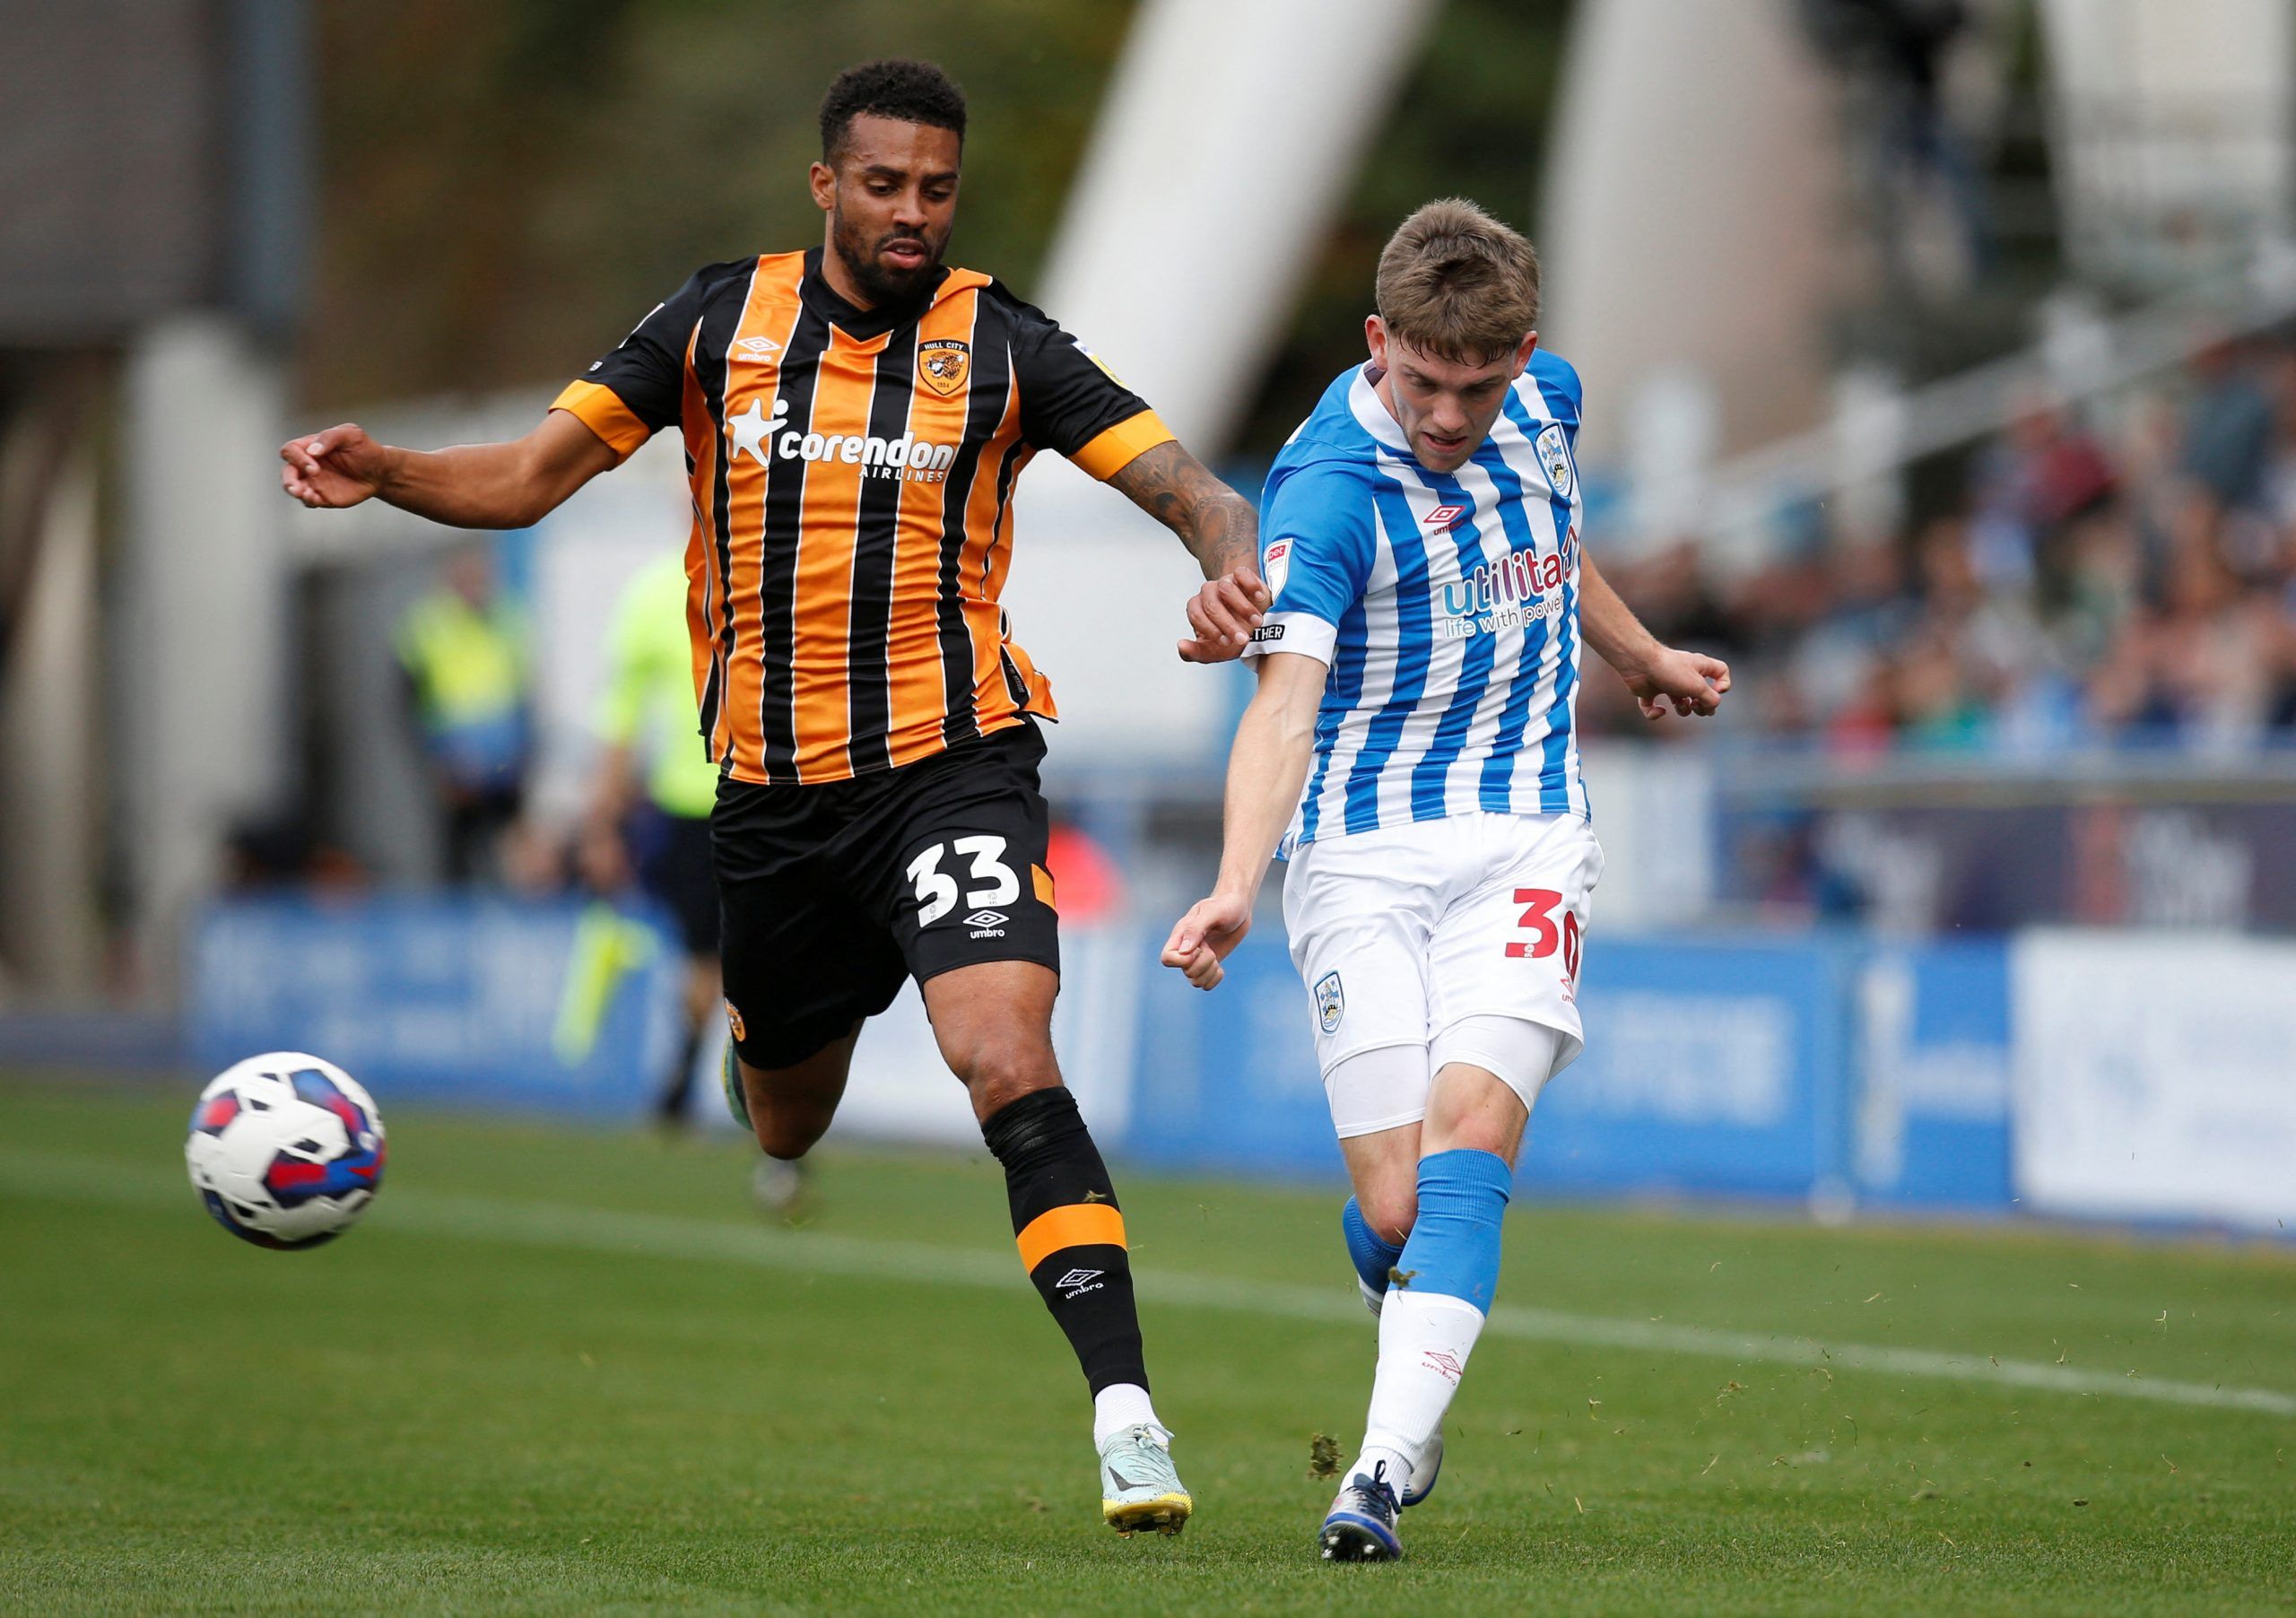 Soccer Football - Championship - Huddersfield Town v Hull City - John Smith's Stadium, Huddersfield, Britain - October 9, 2022 Hull City's Cyrus Christie in action with Huddersfield Town's Ben Jackson  Action Images/Ed Sykes  EDITORIAL USE ONLY. No use with unauthorized audio, video, data, fixture lists, club/league logos or 